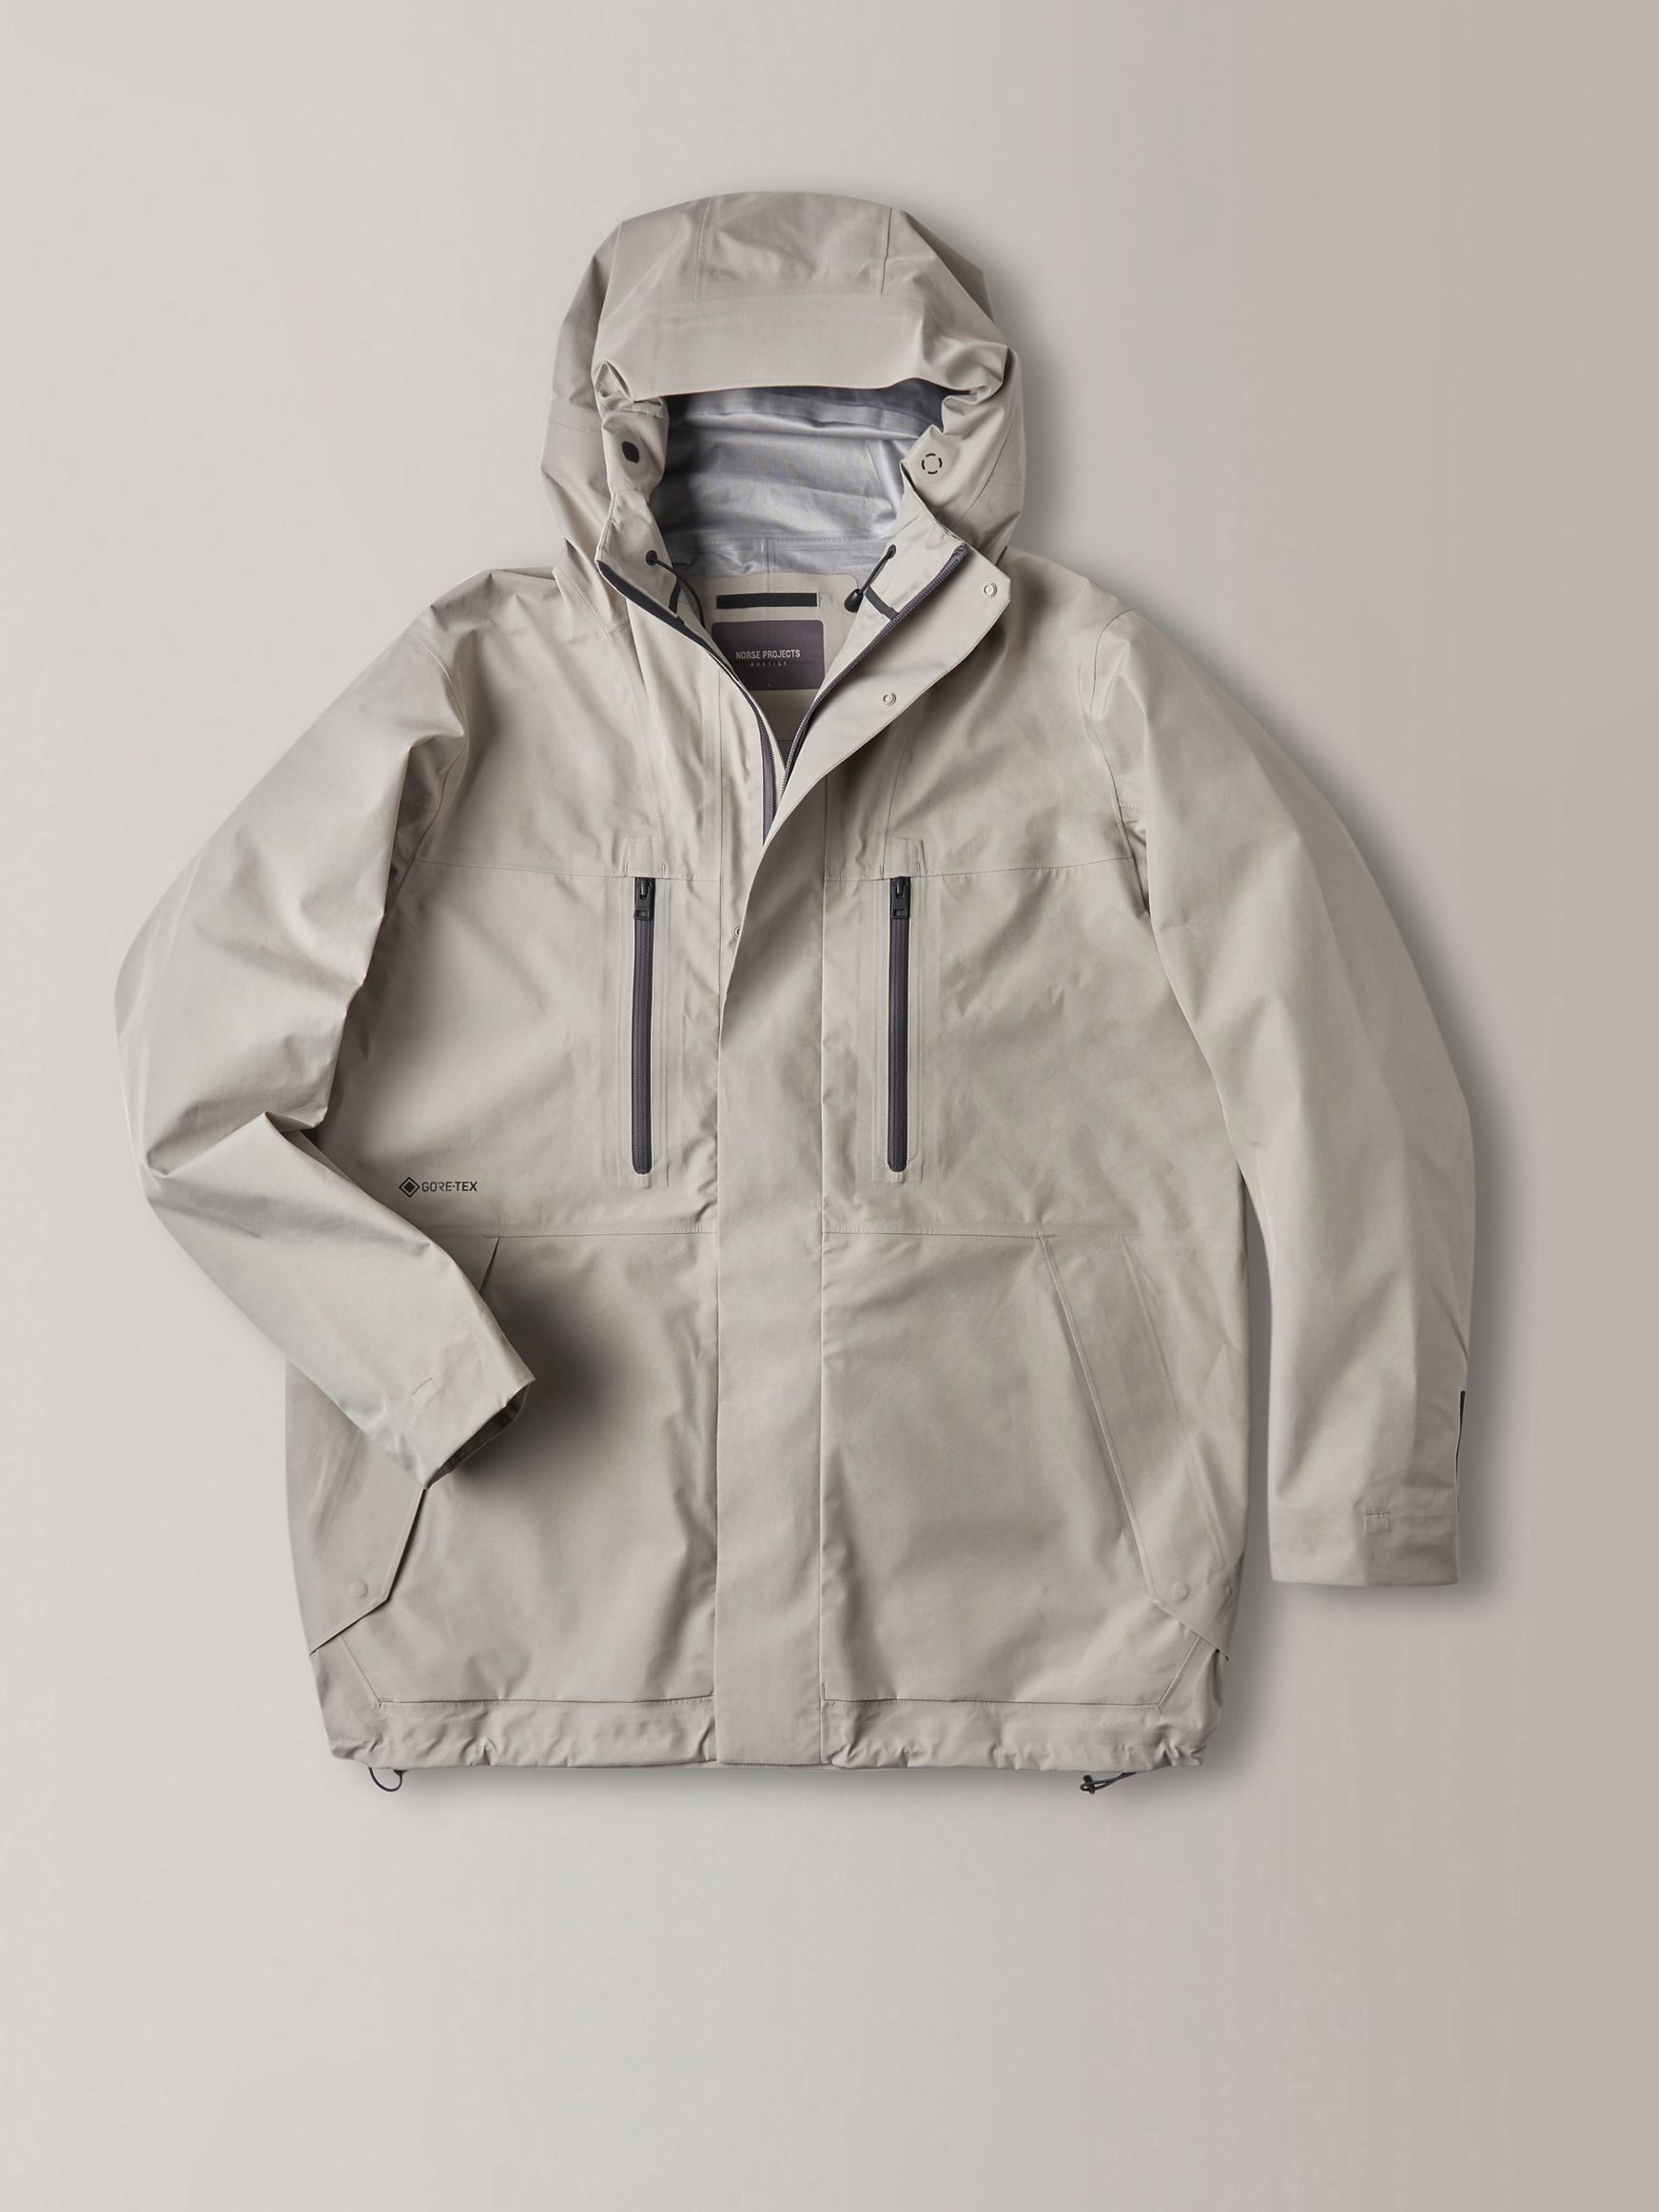 GORE-TEX® Stand Collar Jacket | Norse Projects Arktisk | Slowear